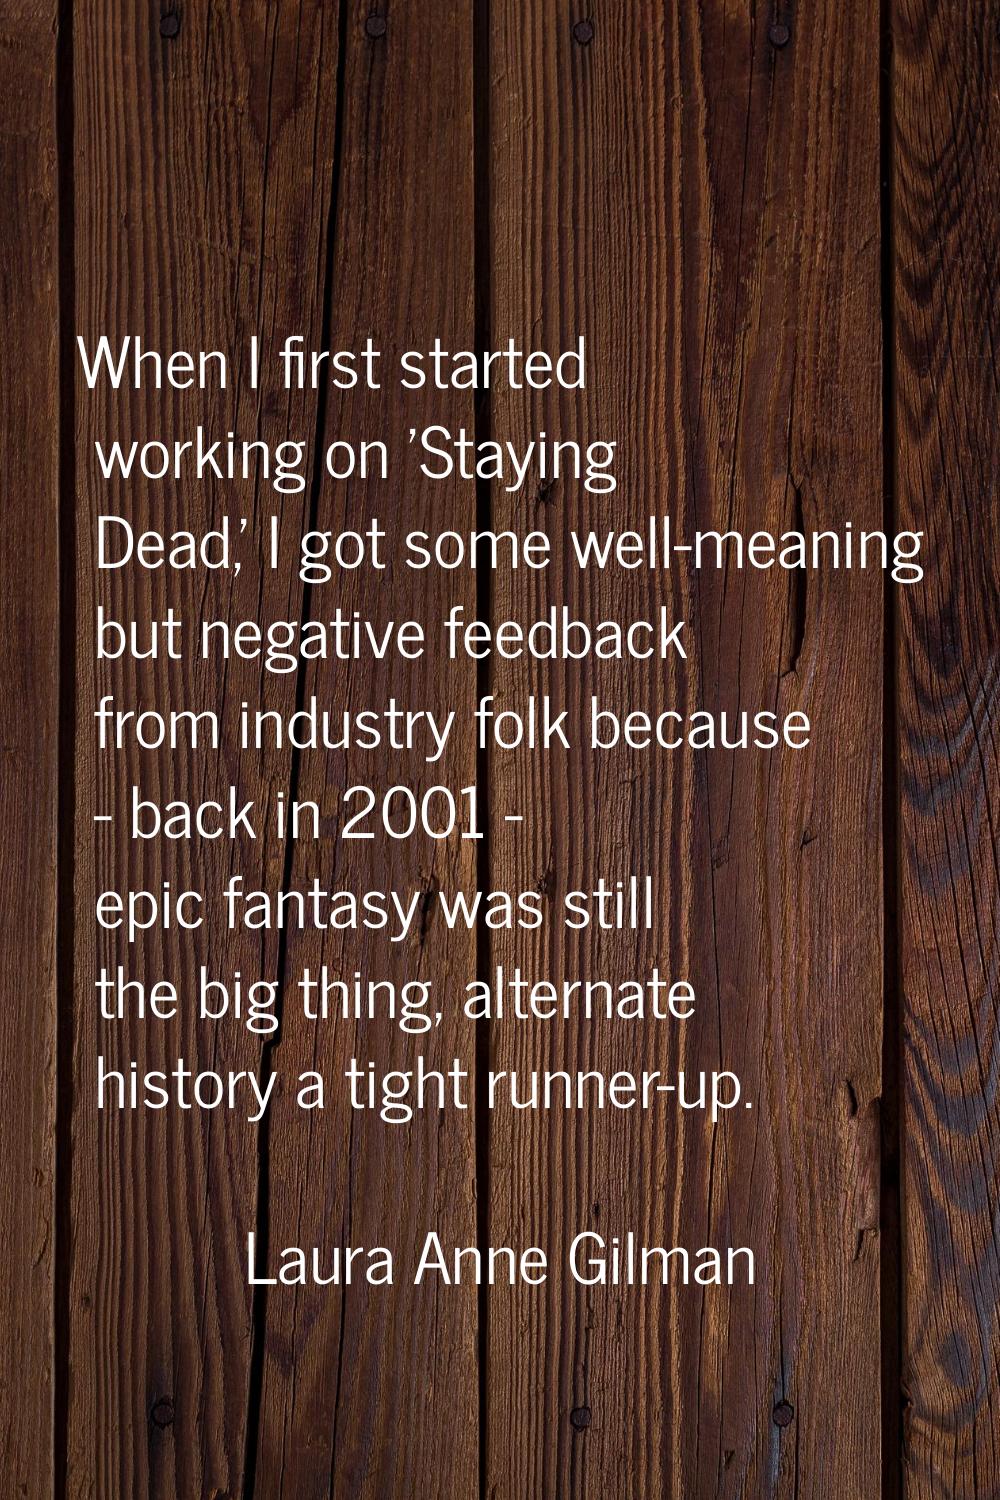 When I first started working on 'Staying Dead,' I got some well-meaning but negative feedback from 